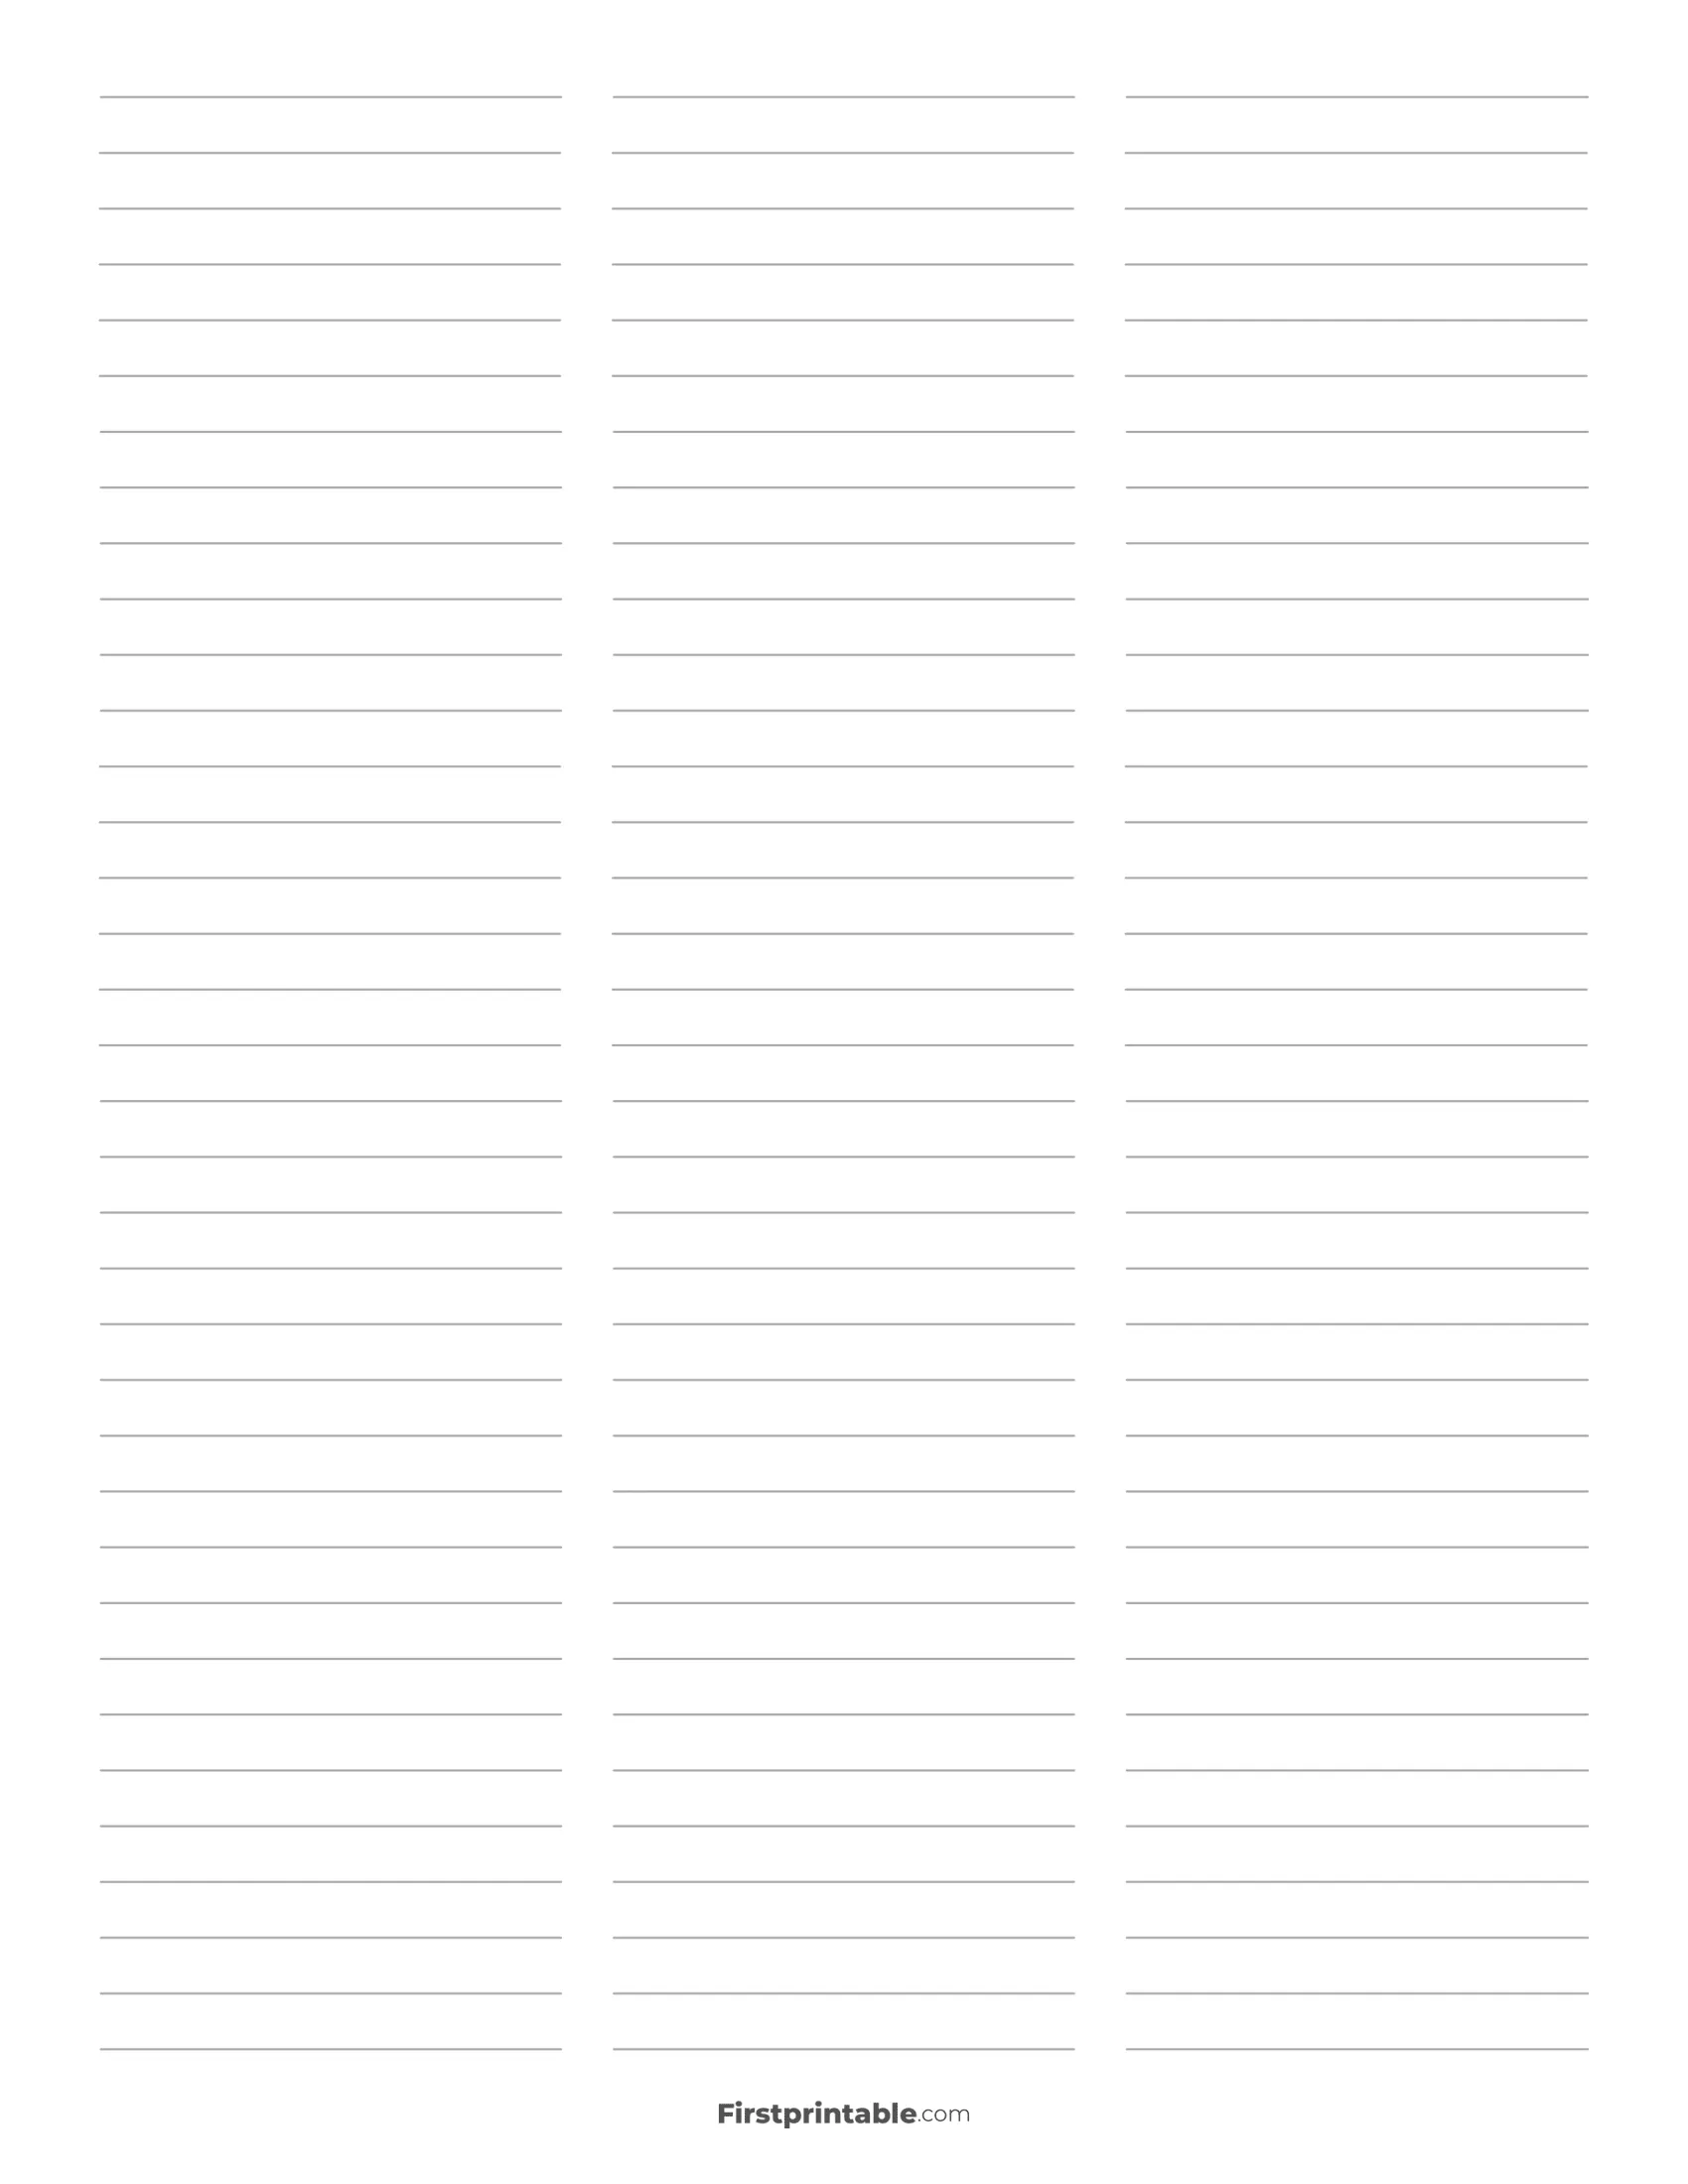 Printable Lined Paper - 3 Column